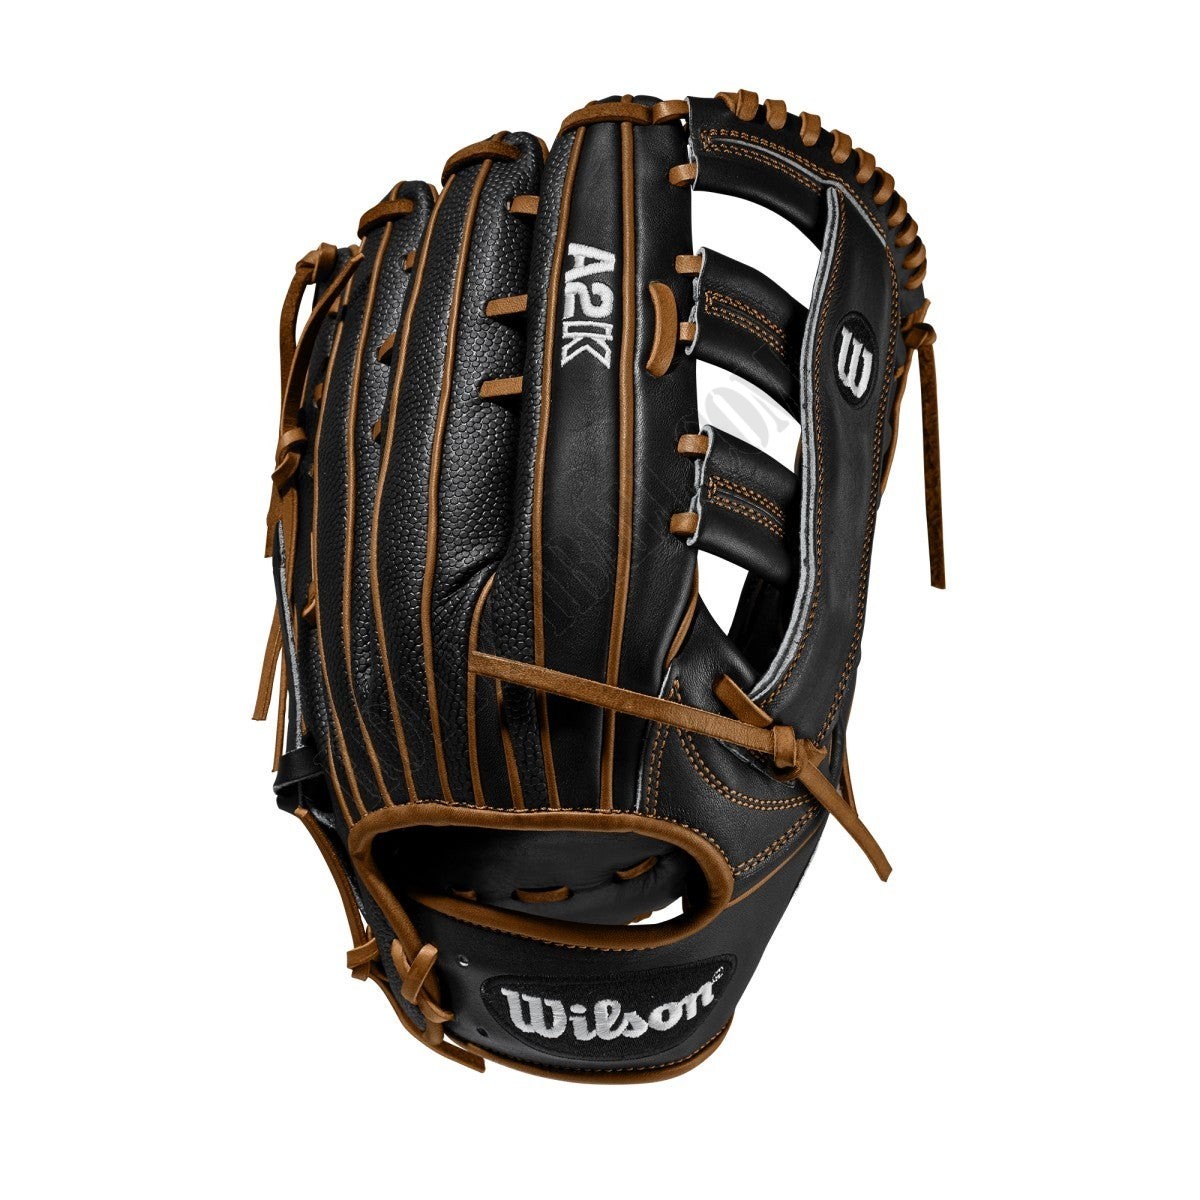 2020 A2K 1775 12.75" Outfield Baseball Glove ● Wilson Promotions - -1